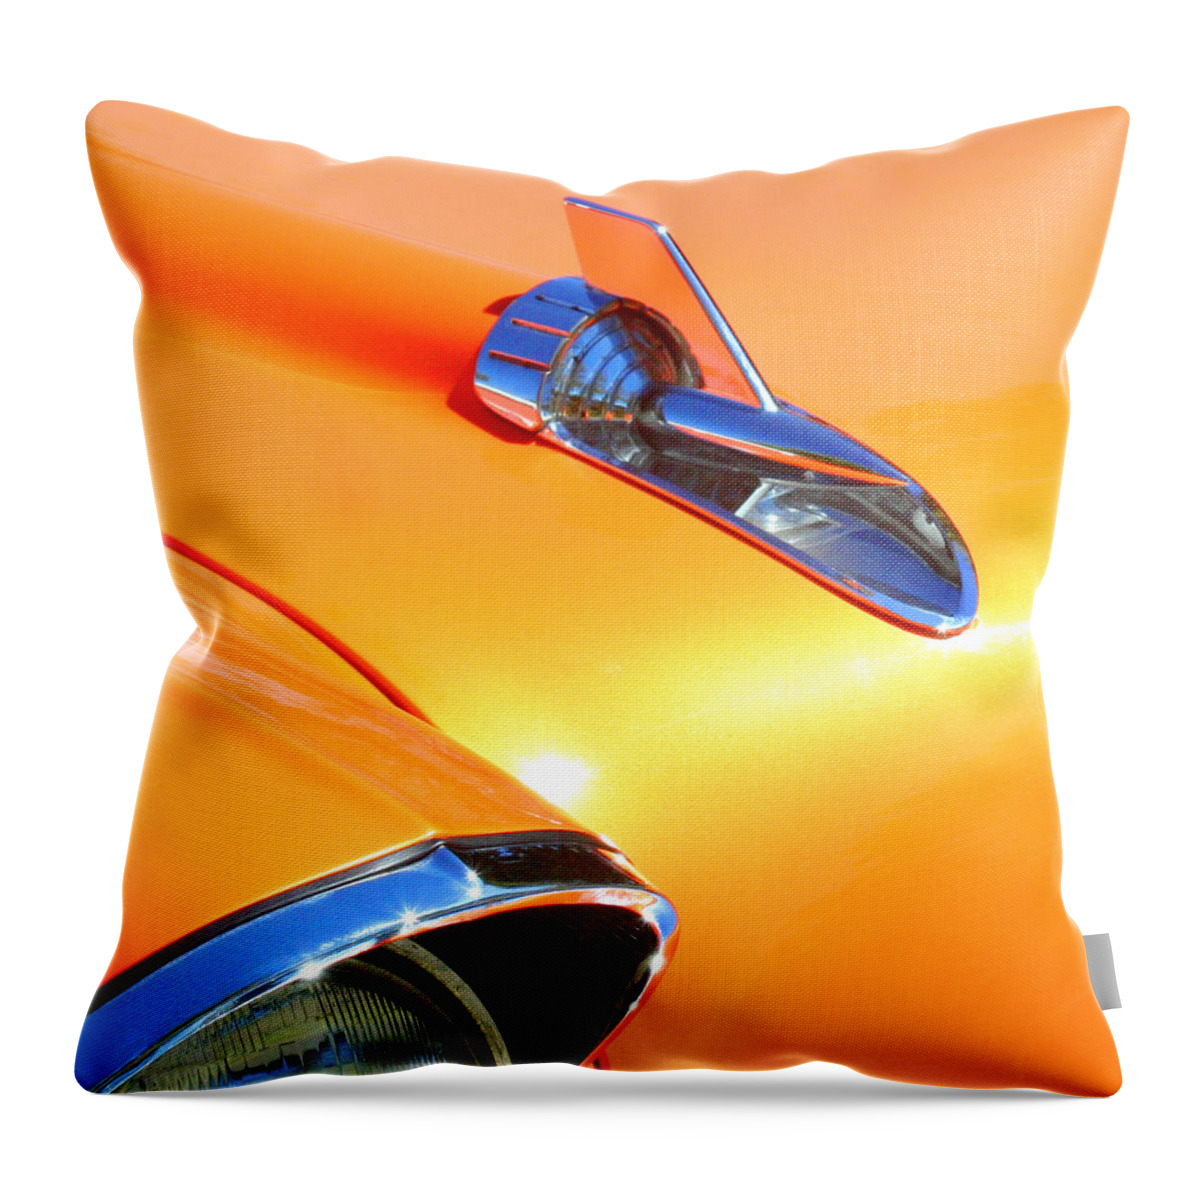 Car Throw Pillow featuring the photograph Classic Car 1 by Art Block Collections